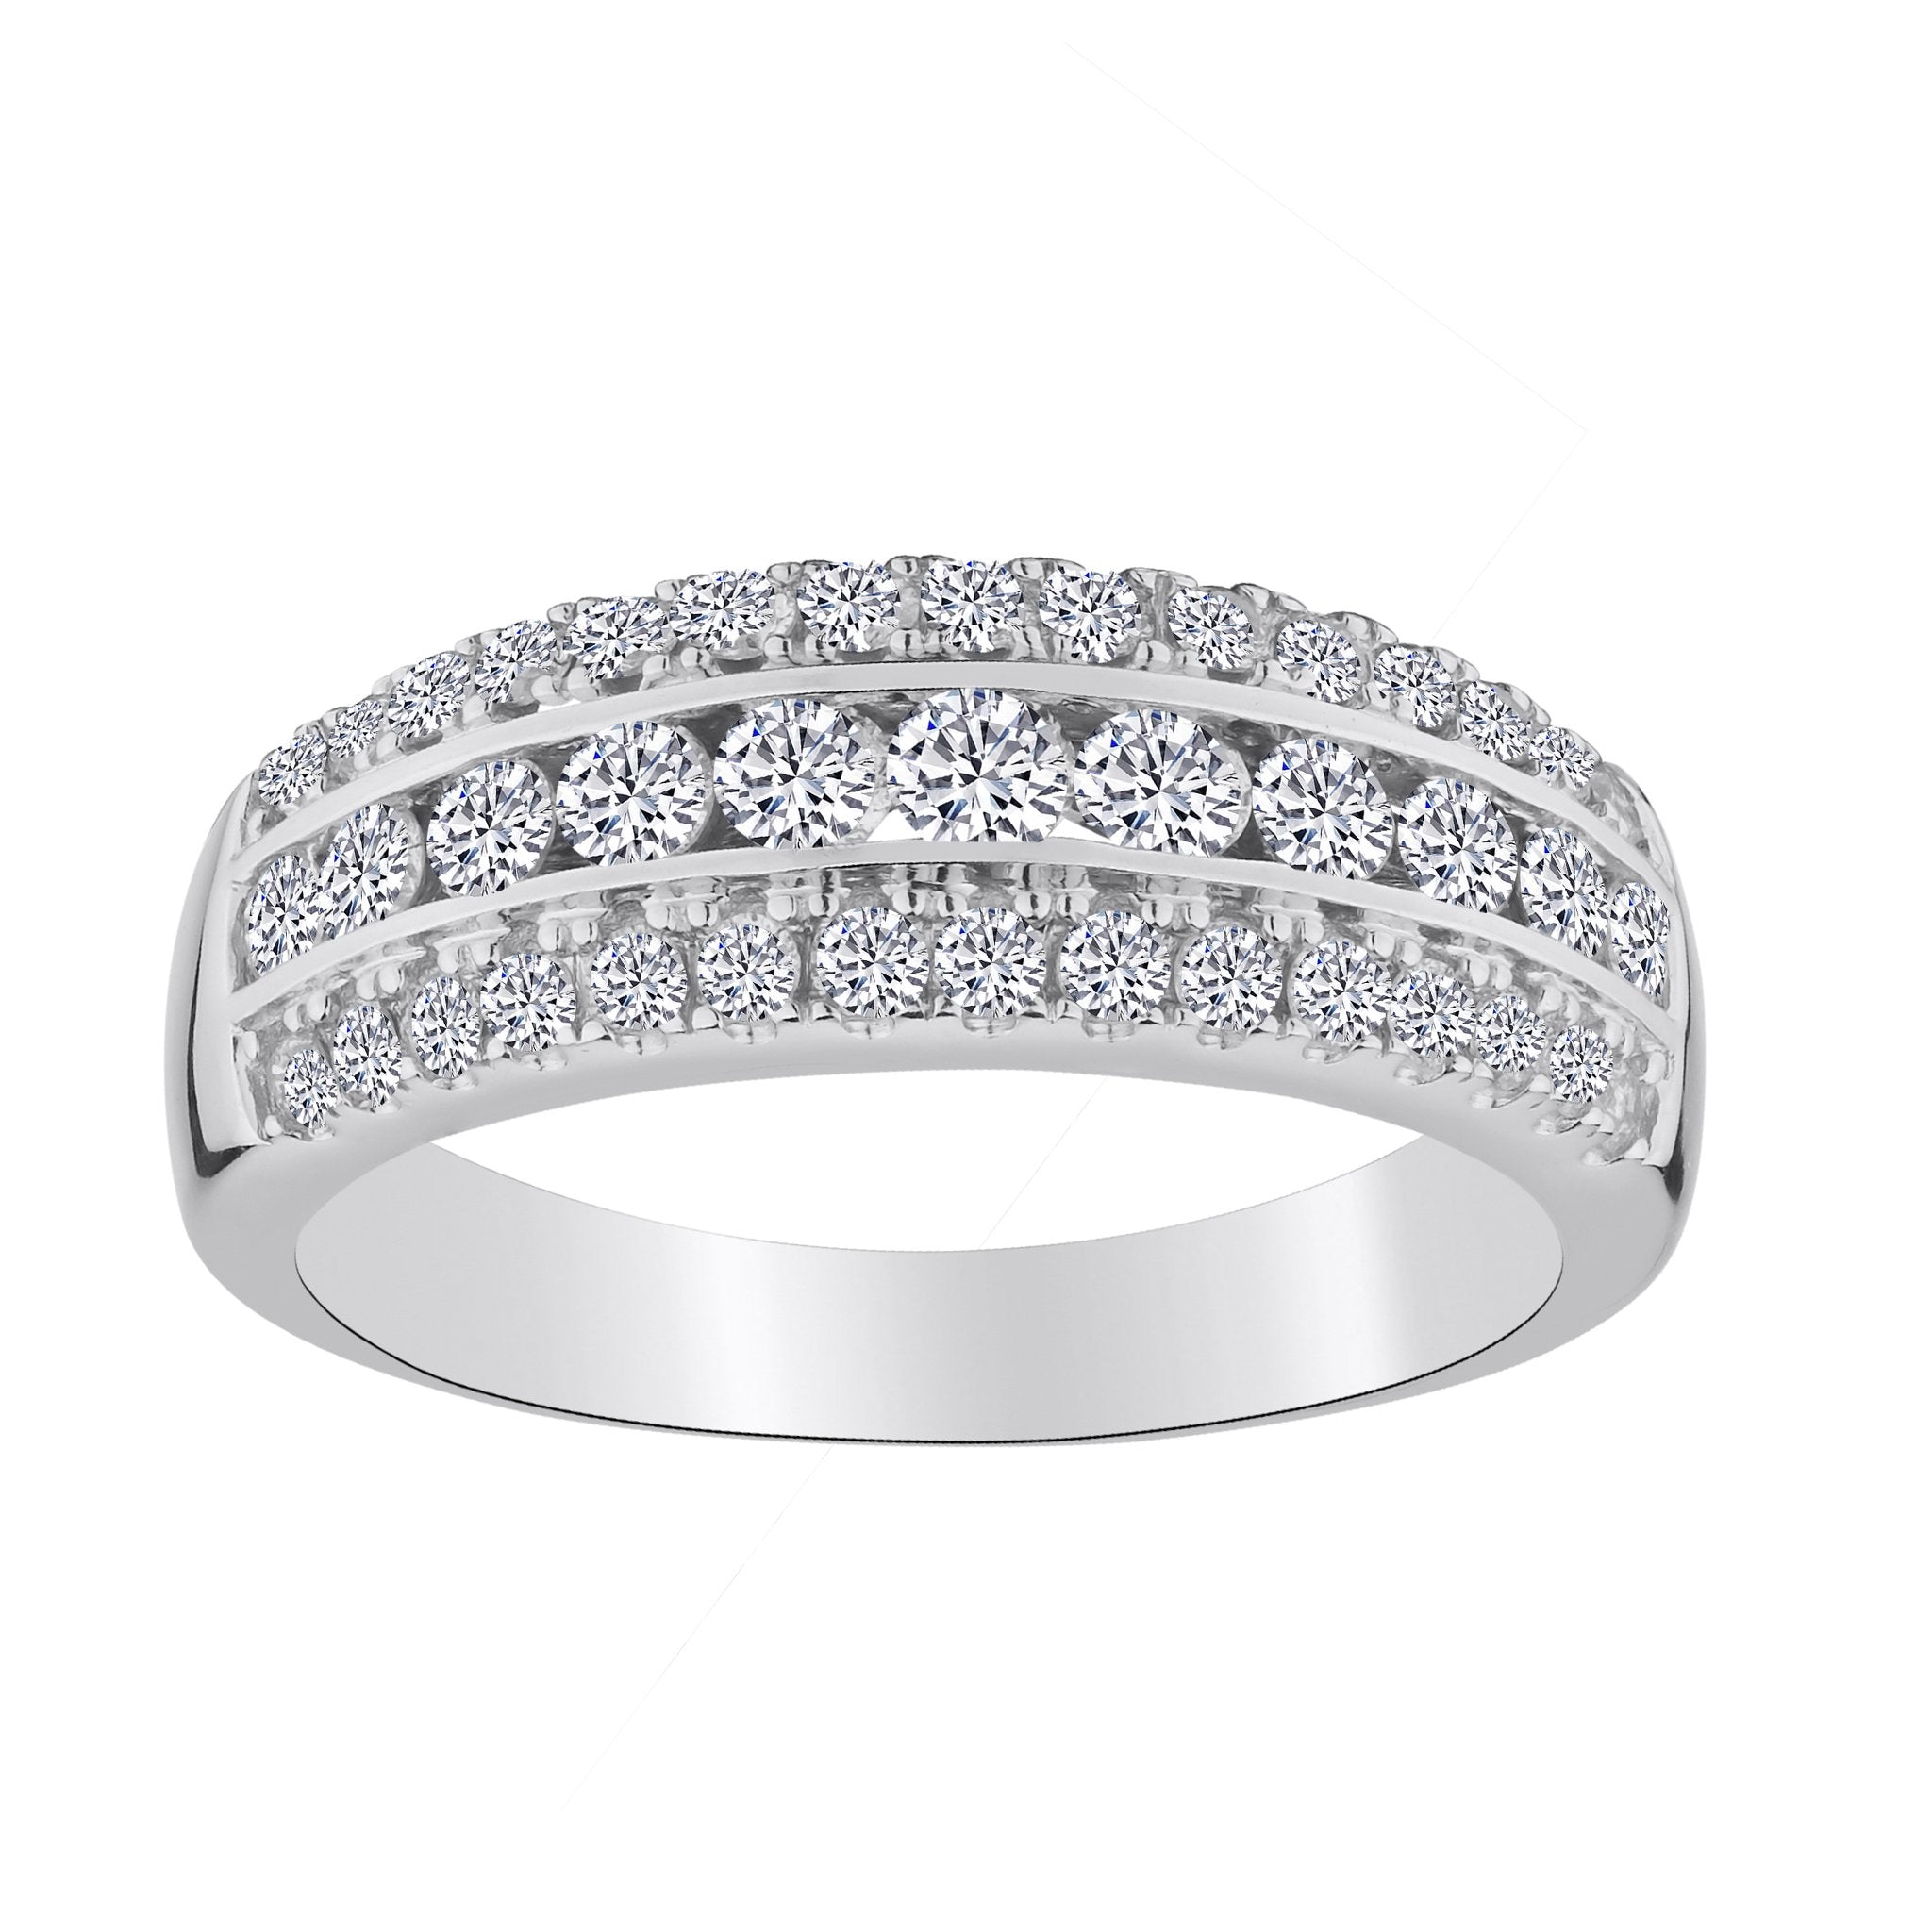 .75 Carat Diamond Anniversary Ring,  10kt White Gold. Fashion Rings - Griffin Jewellery Designs